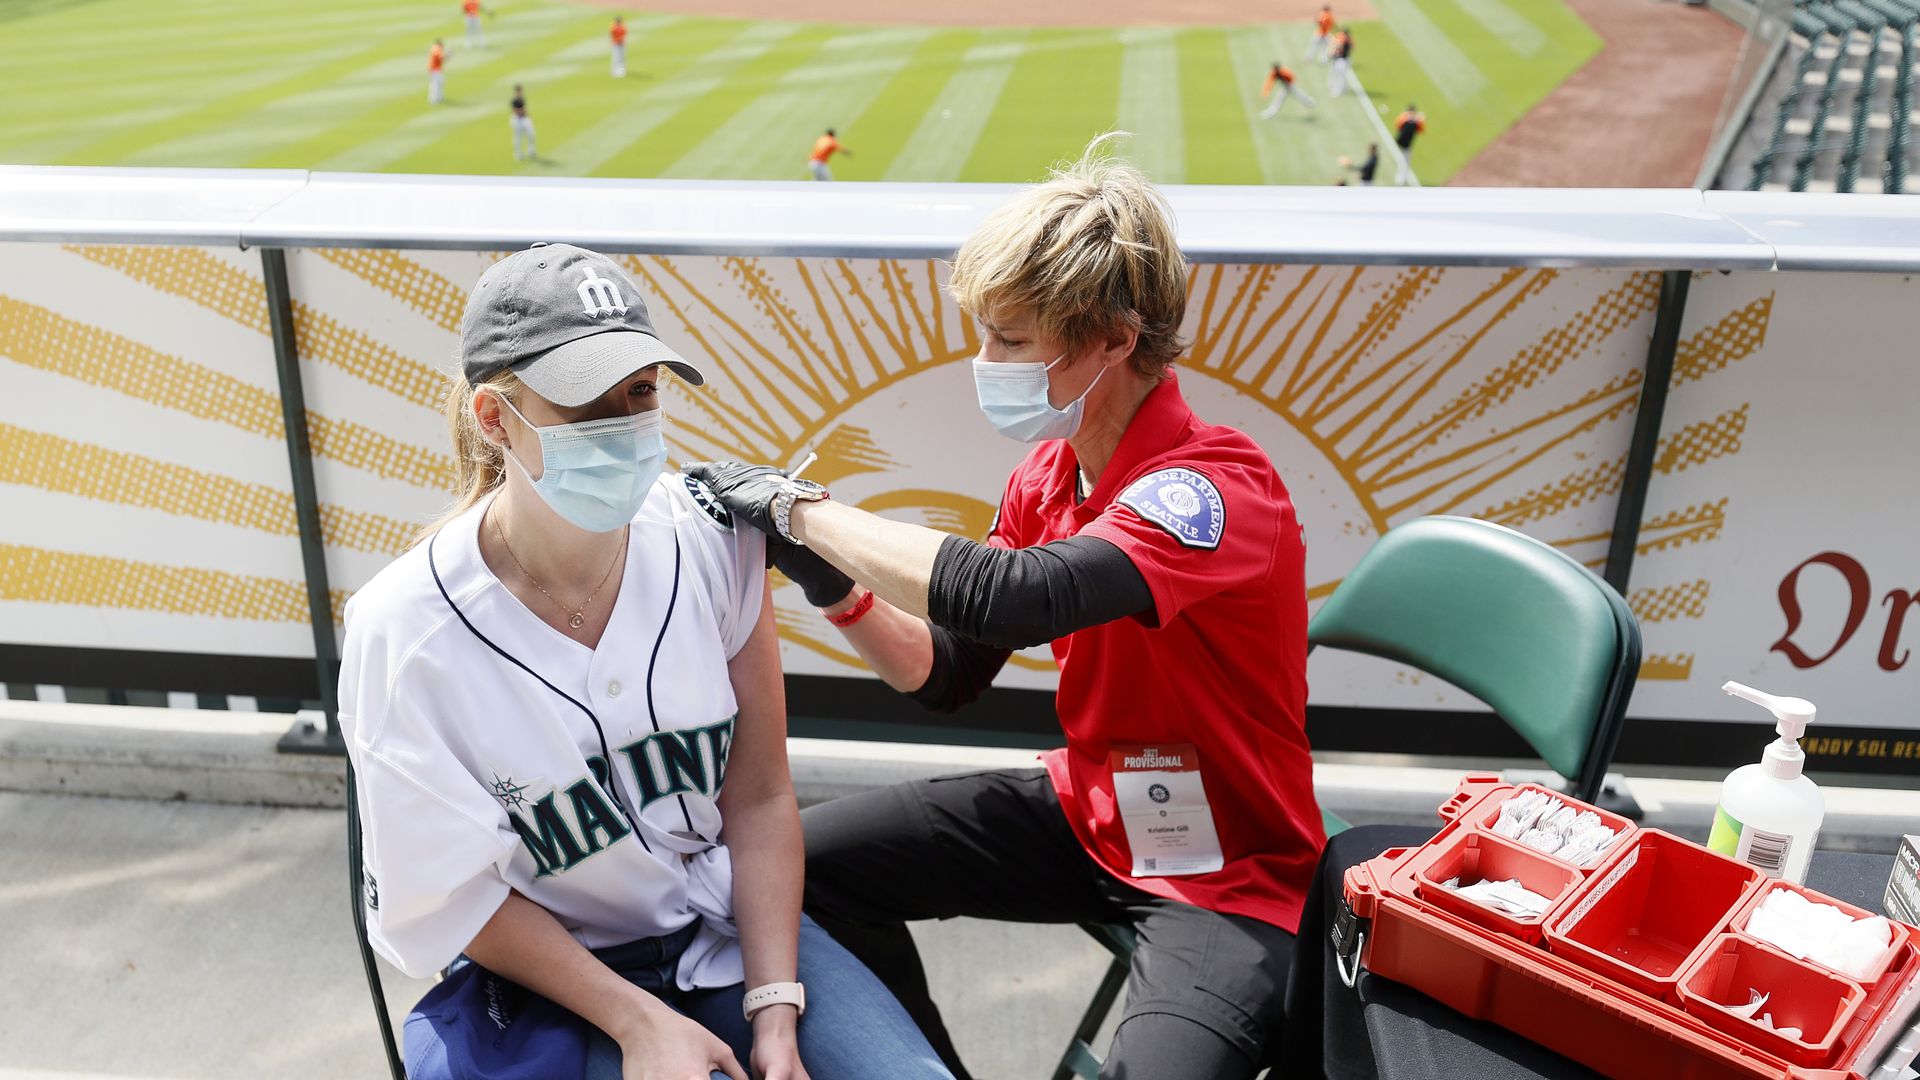 Mariners fan getting vaccinated for COVID-19